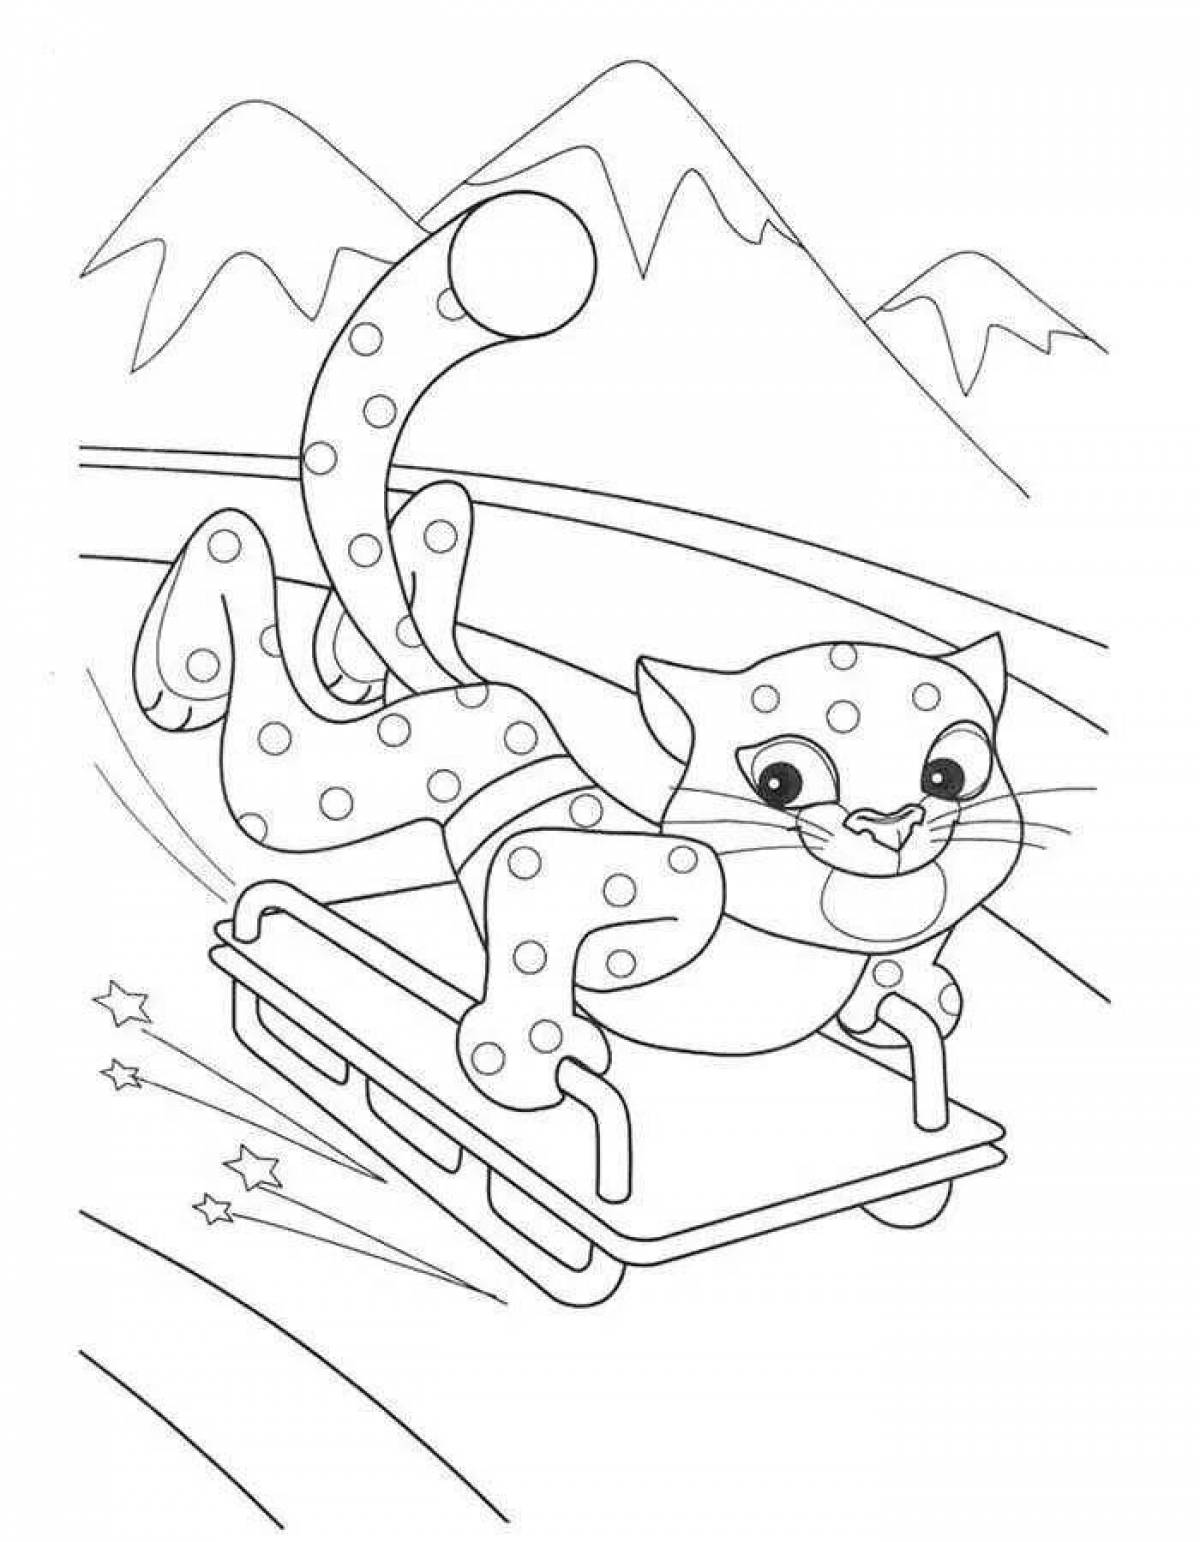 Fascinating winter sports coloring book for kids